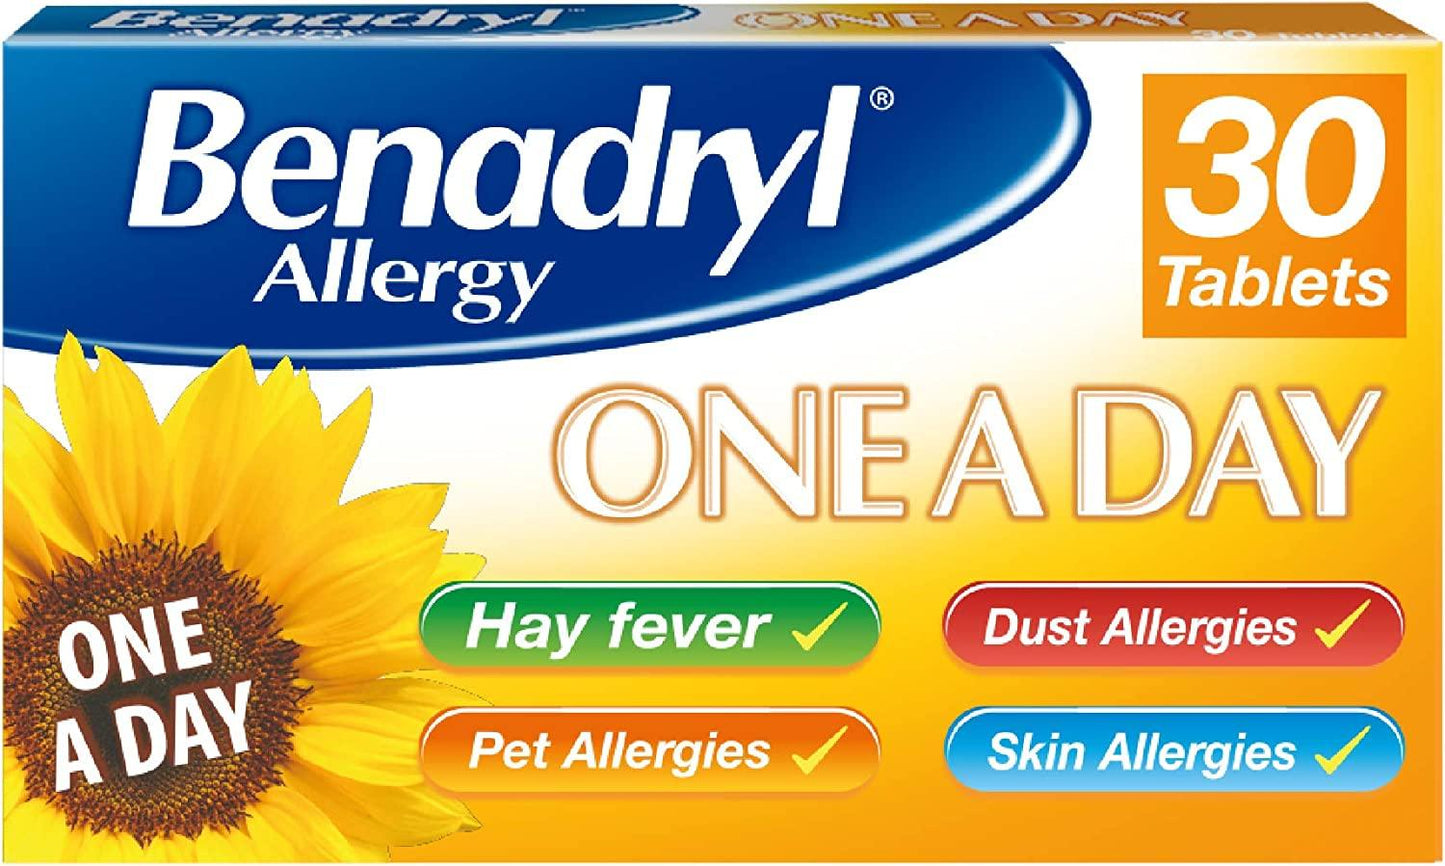 Benadryl Allergy One a Day Tablets Pack of 30 - welzo